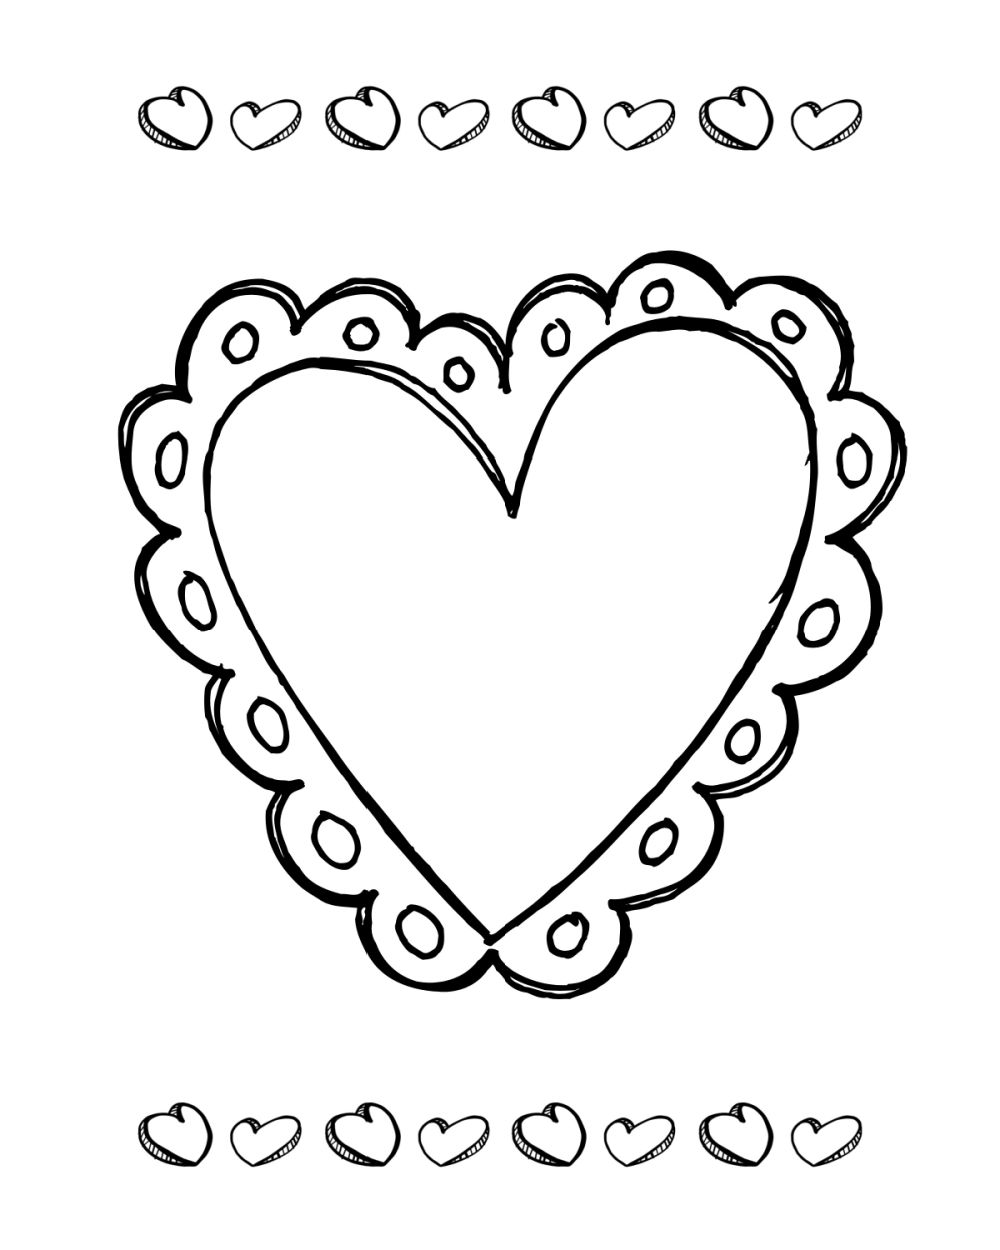 Free Printable Valentine Heart Coloring Page   Mama Likes This